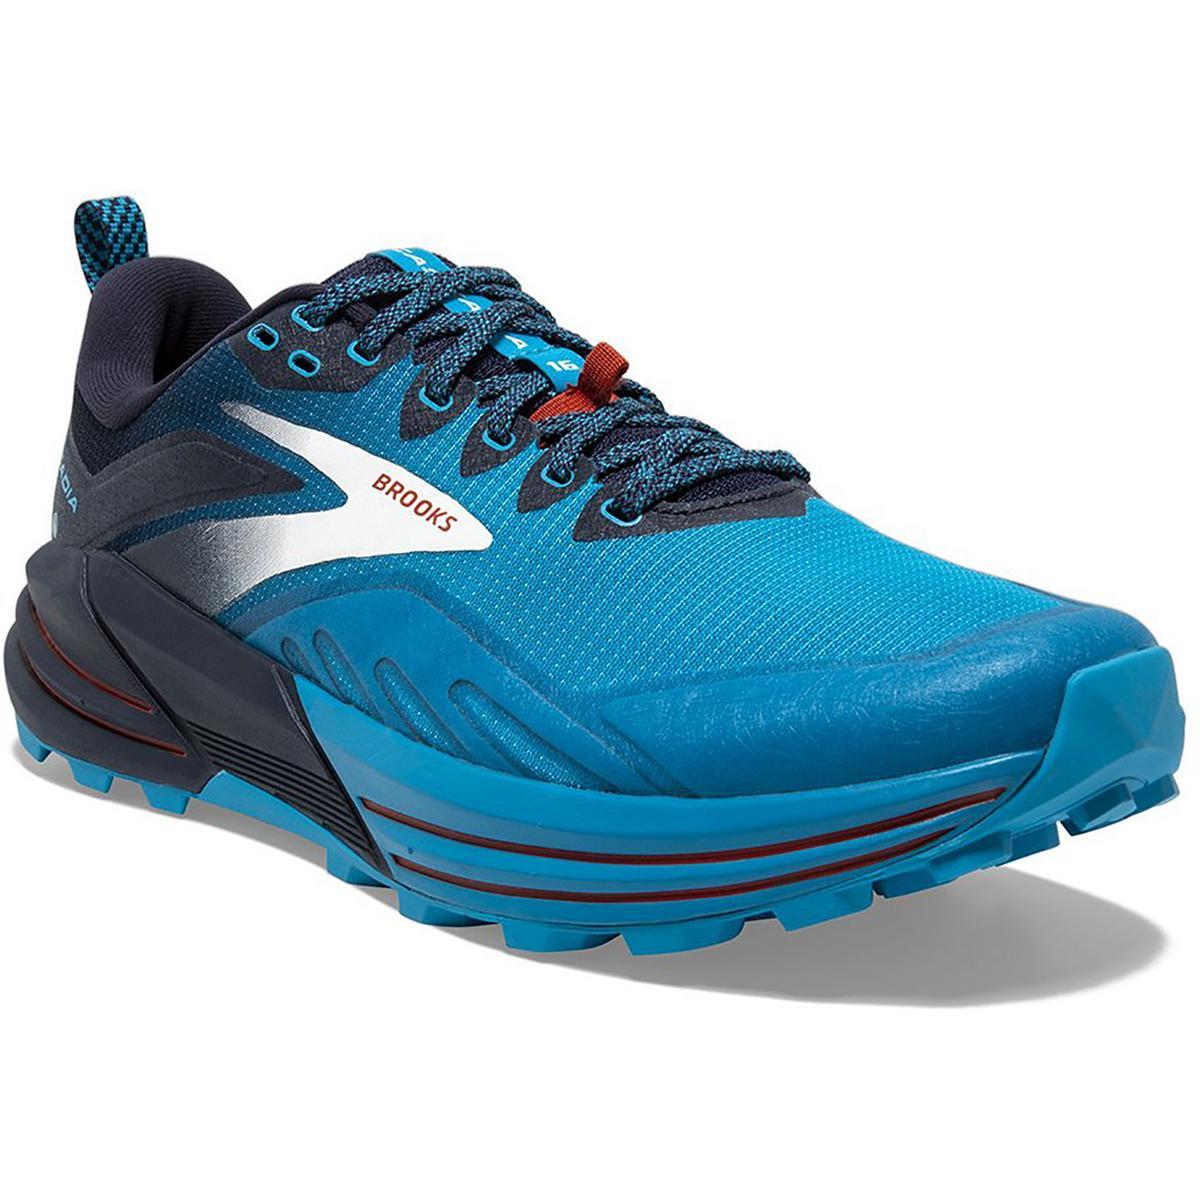 Brooks Mens Cascadia 16 Gym Athletic and Training Shoes Sneakers Bhfo 8779 Peacoat/Atomic Blue/Rooibos